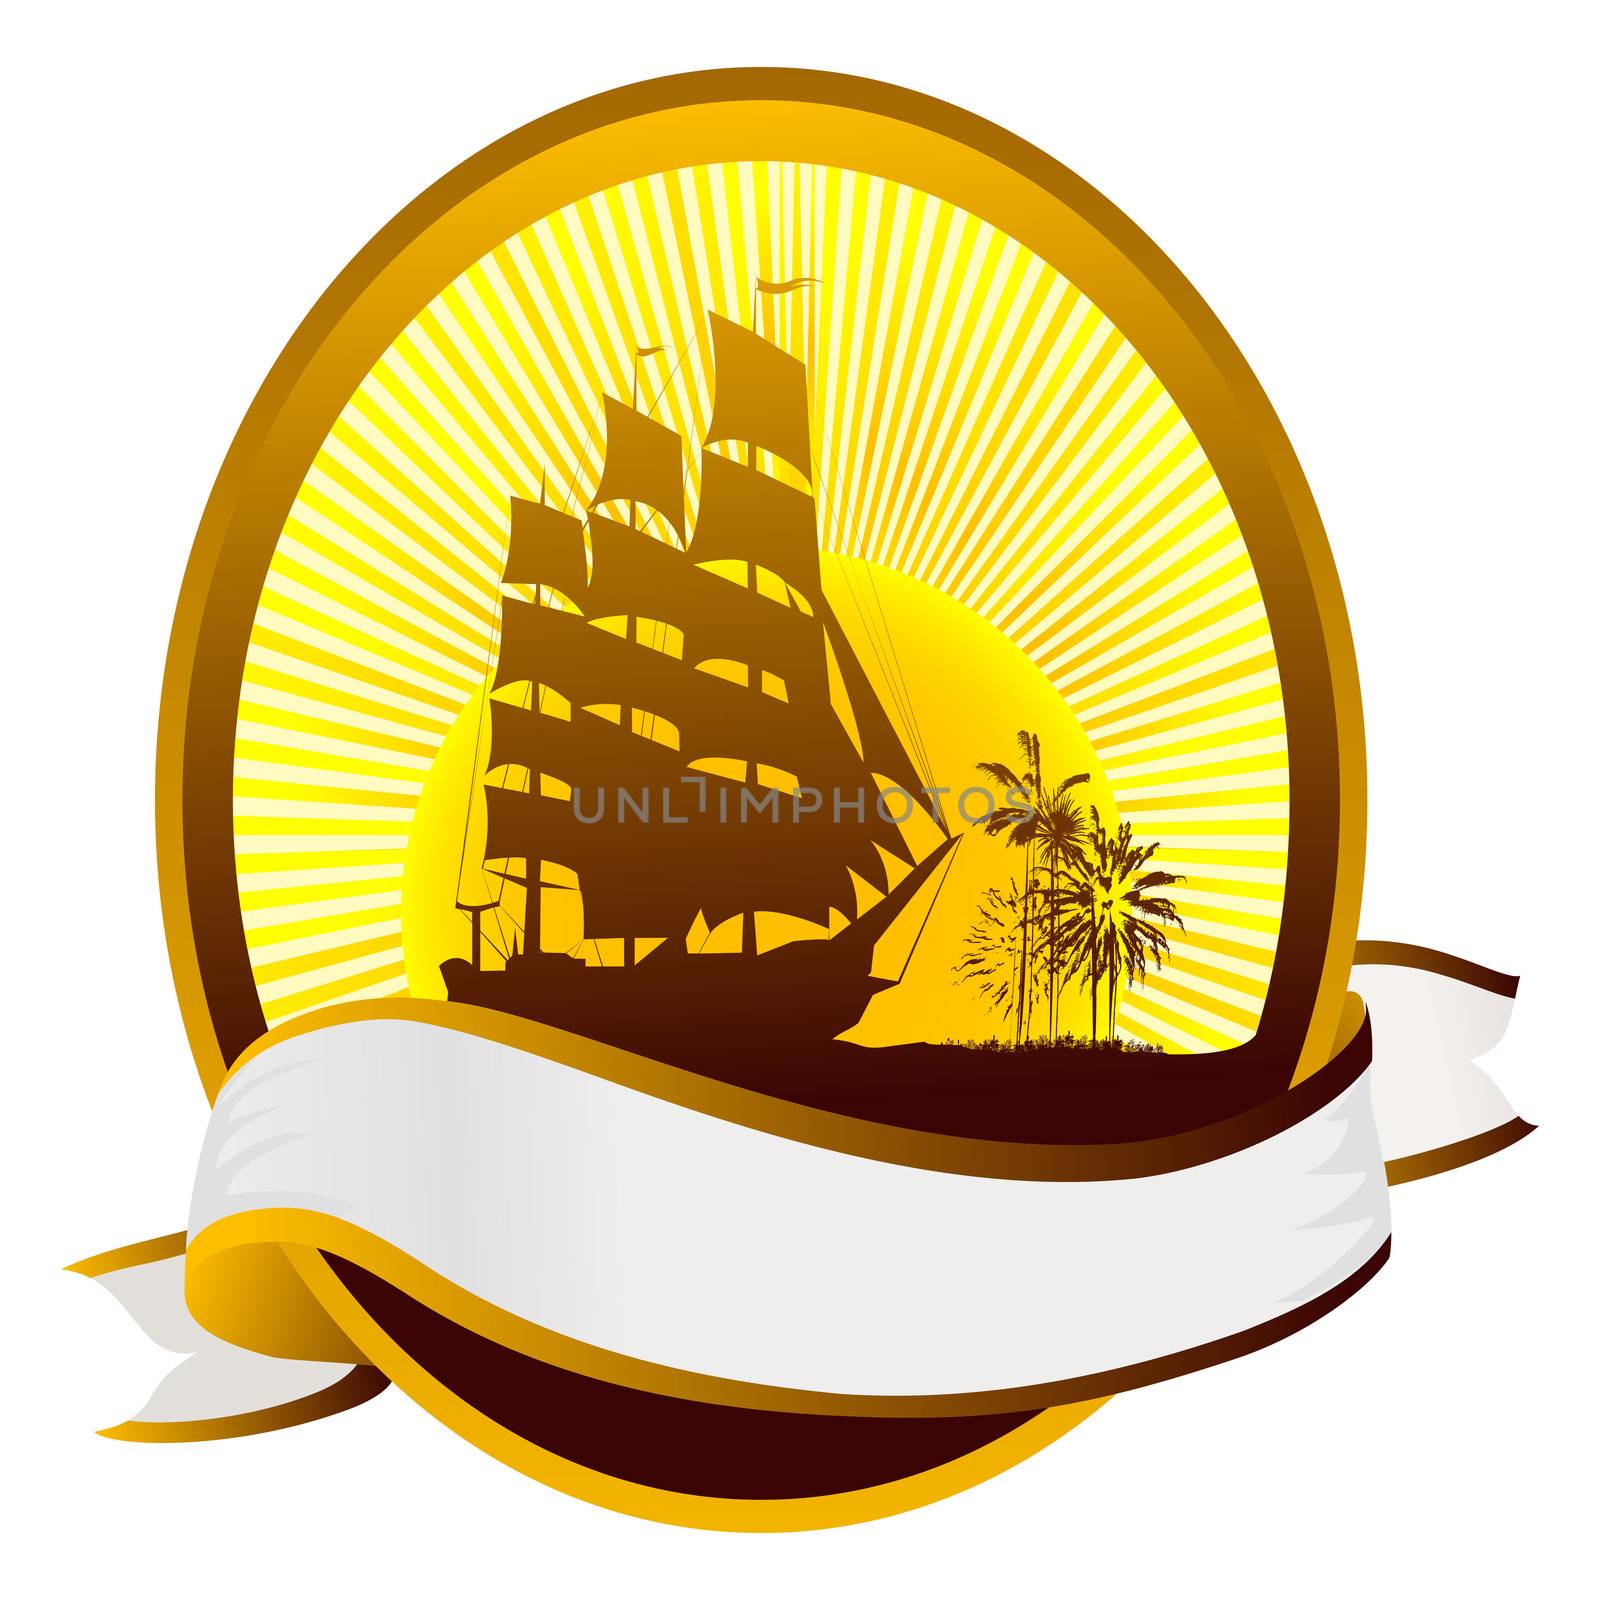 Summer tourism icon with ship silhouette, tropical island and banner for text.